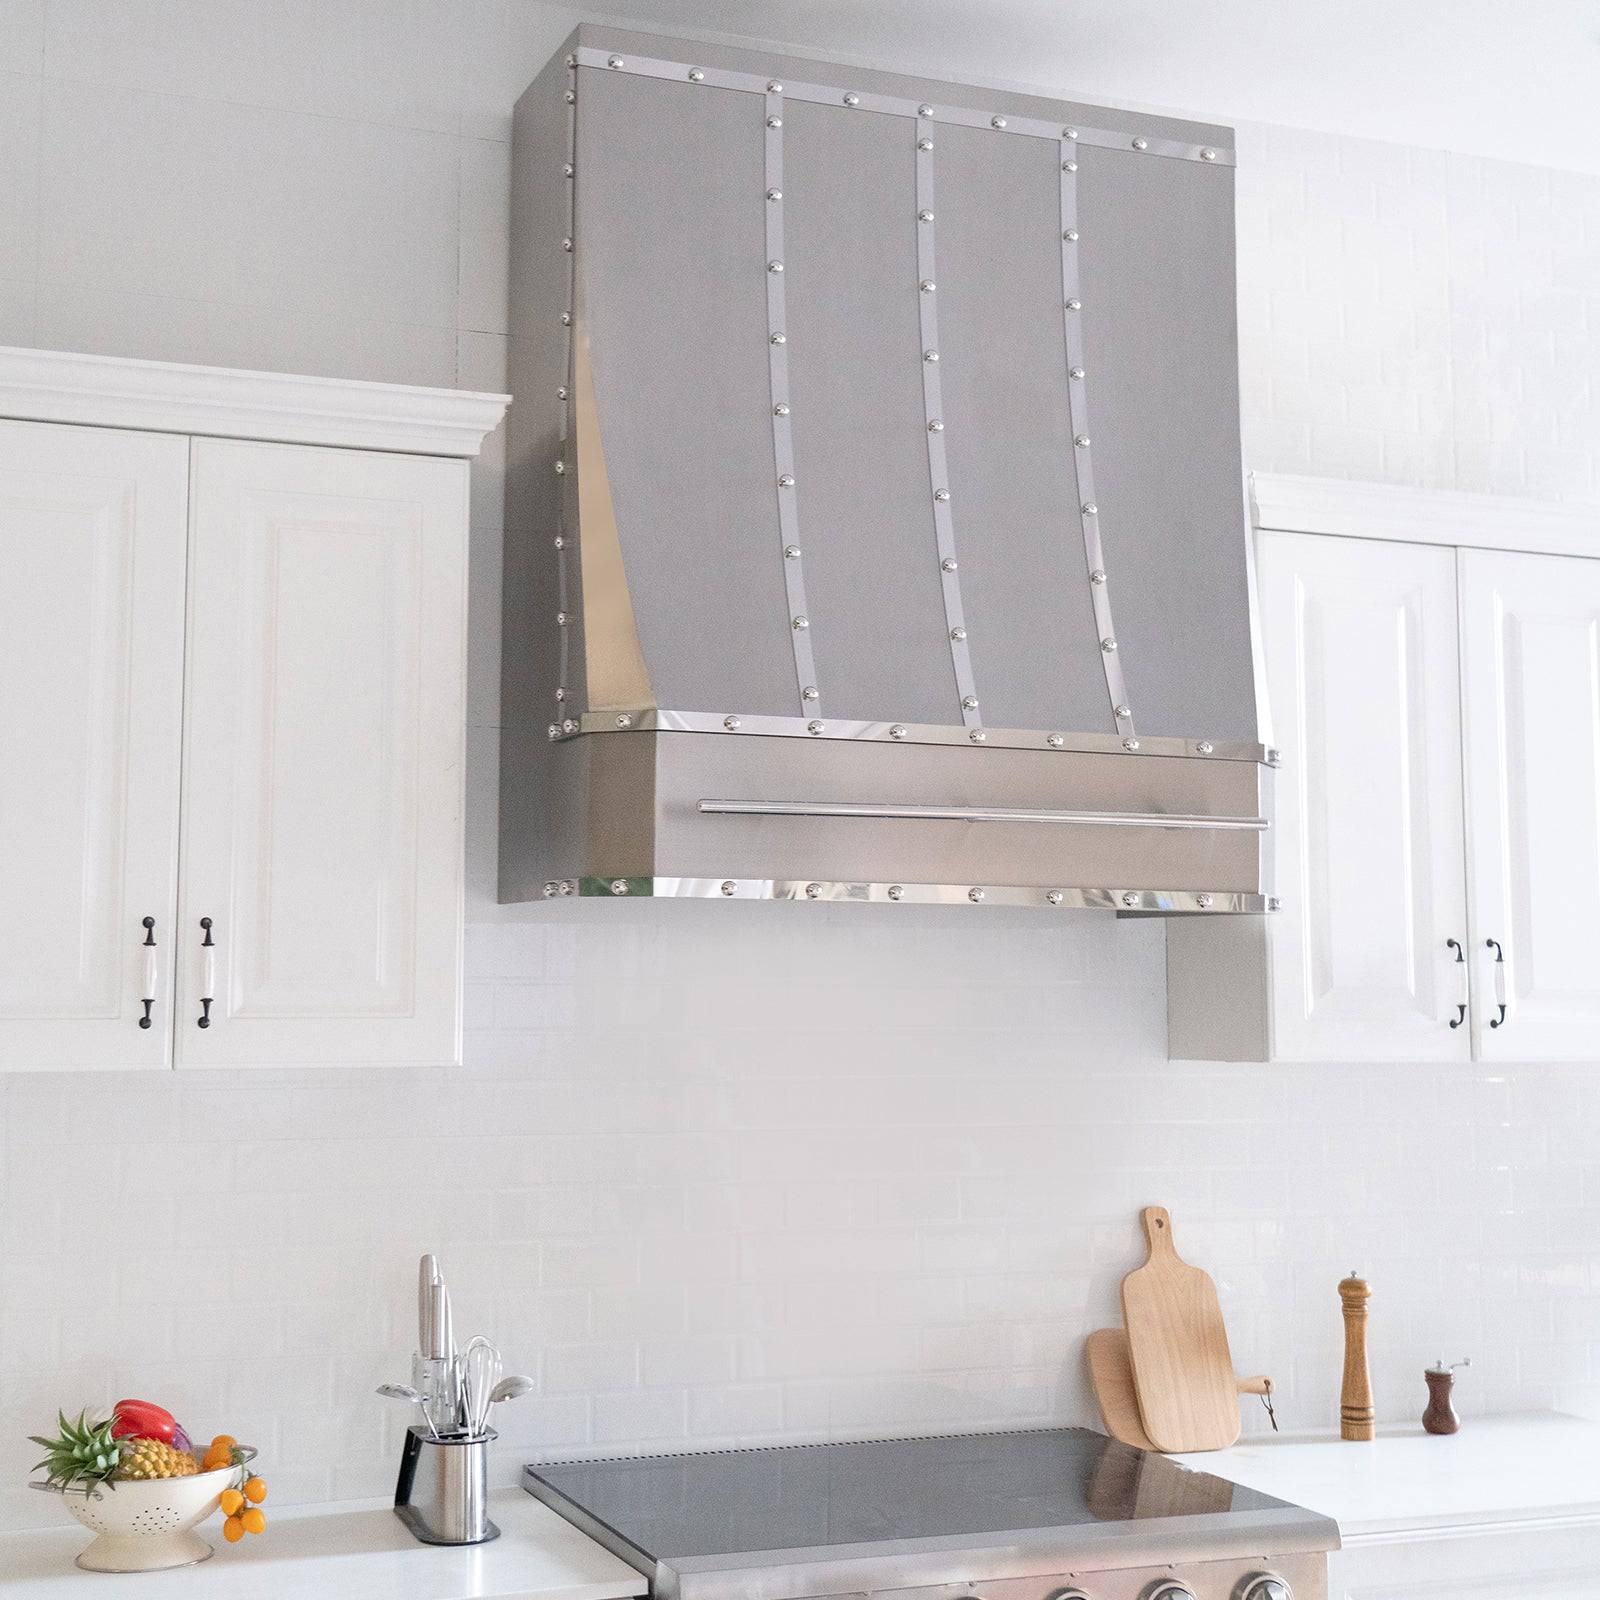 Fobest Custom Handcrafted Brushed Stainless Steel Range Hood with Curved Design FSS-137 - Stainless Steel Range Hood-Fobest Appliance